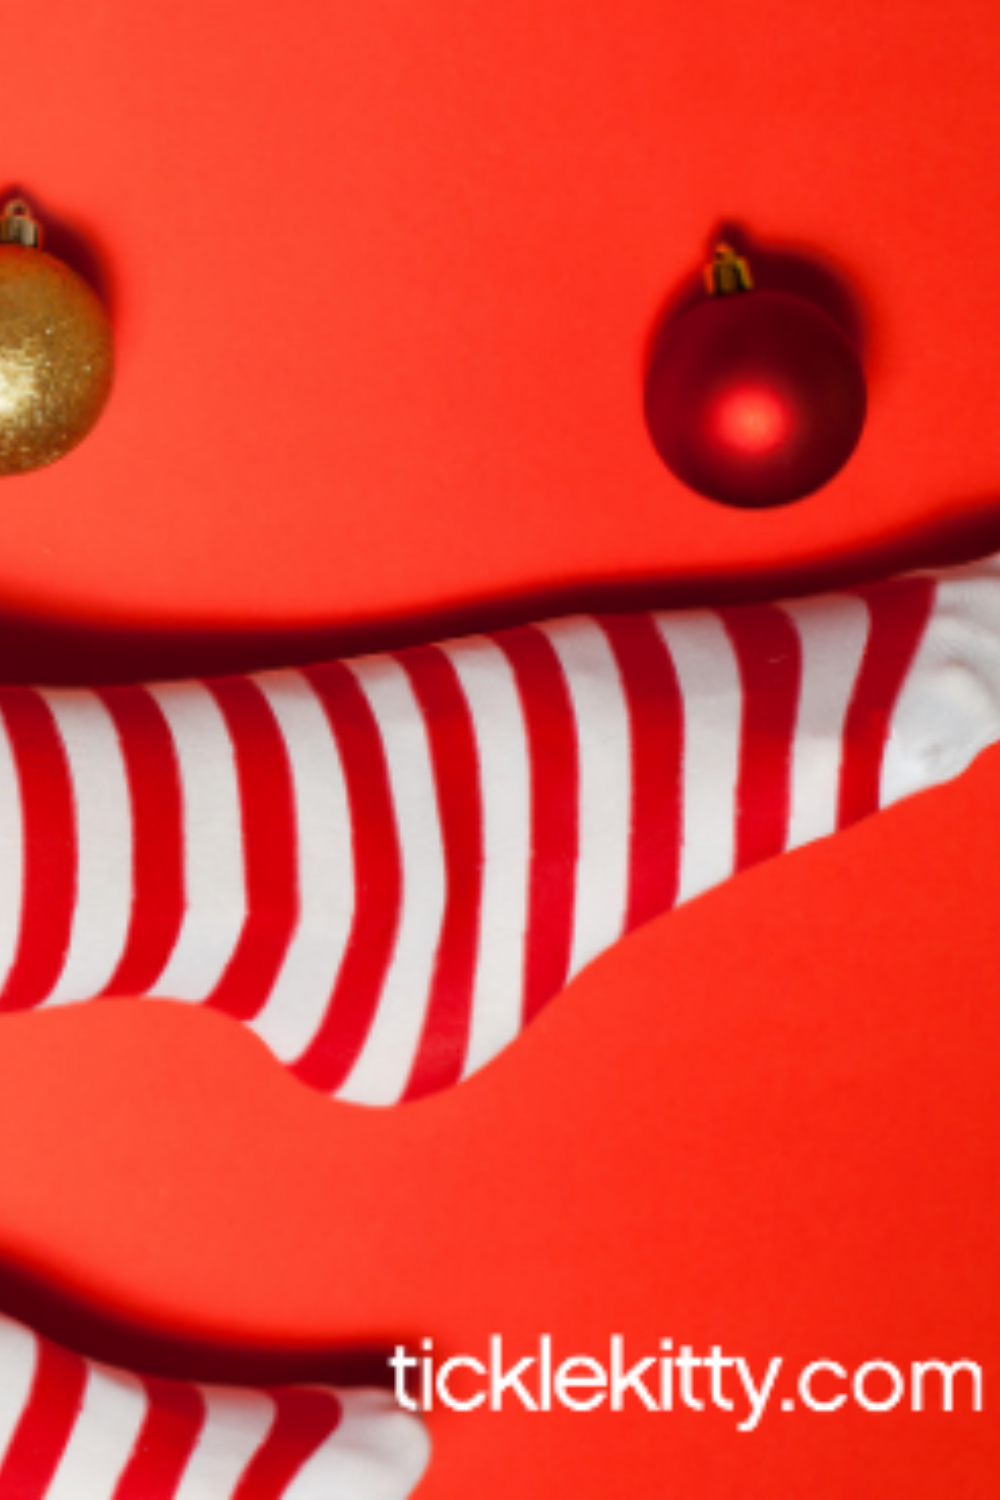 Sex Toy for Holidays? A Sexy Gift-Giving Guide!